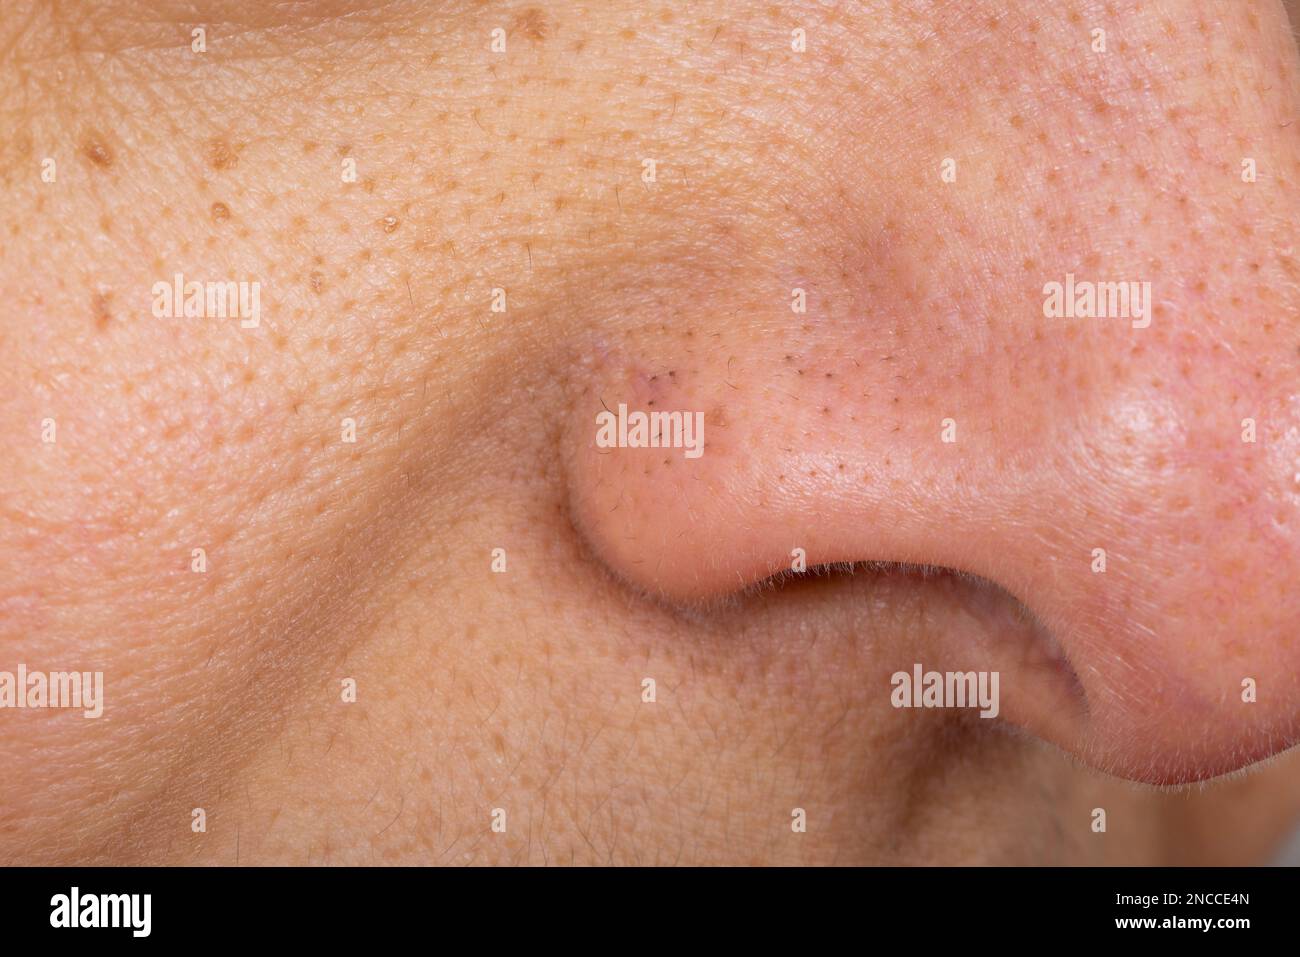 Blocked and enlarged pores, close up of nose and face of middle age Indian Asian woman Stock Photo